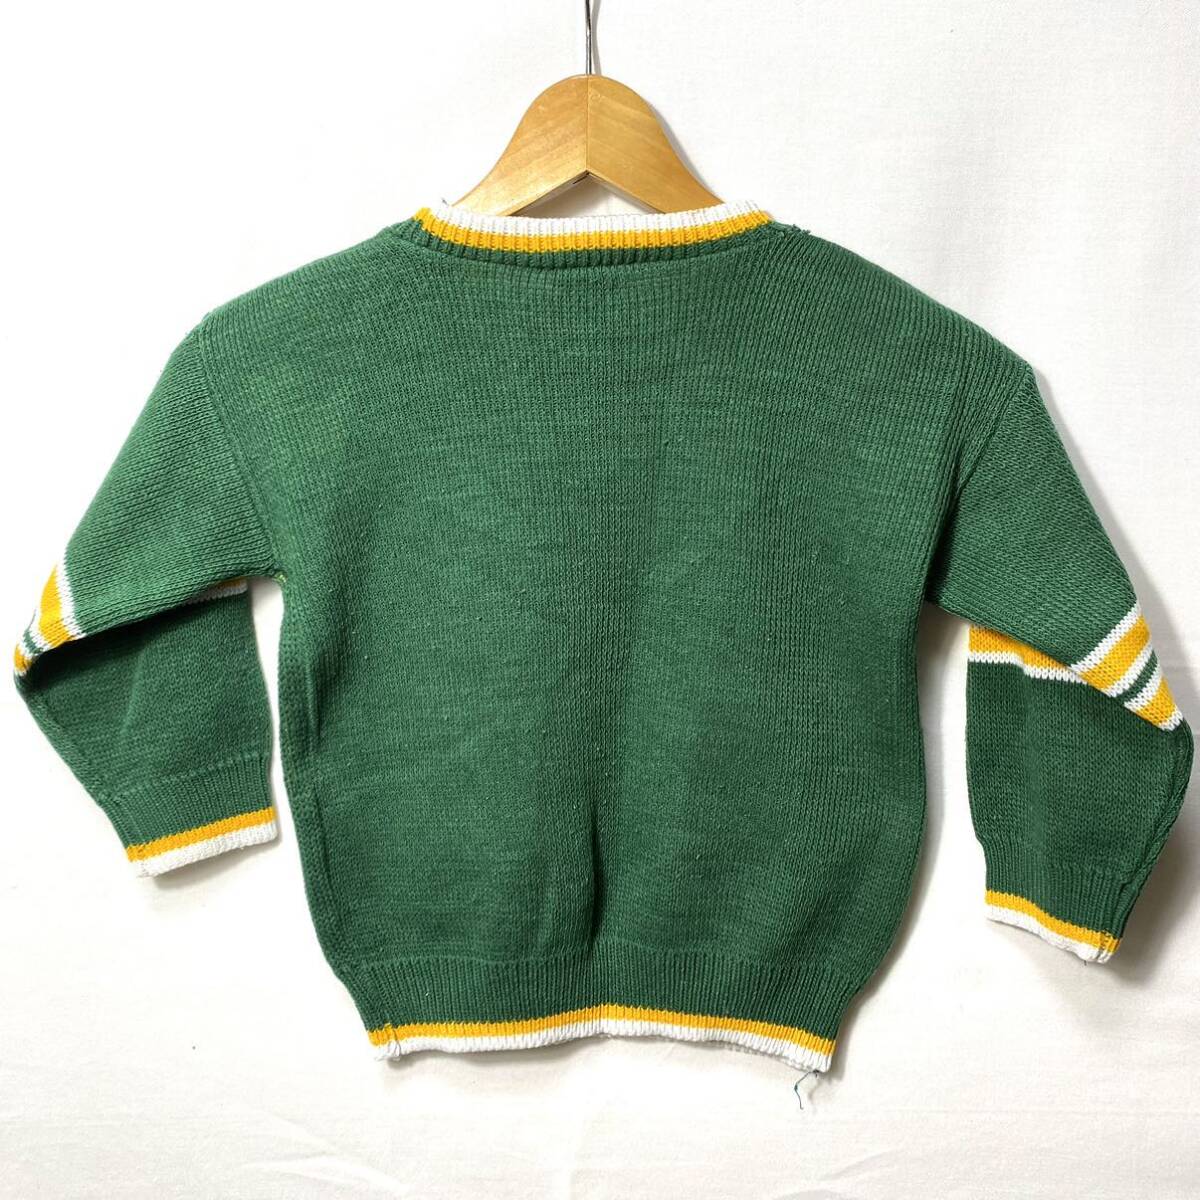 # for children 80s 90s Vintage USA made NFL PACKERS paker z Logo acrylic fiber knitted sweater size 6 green american football American Casual . war #